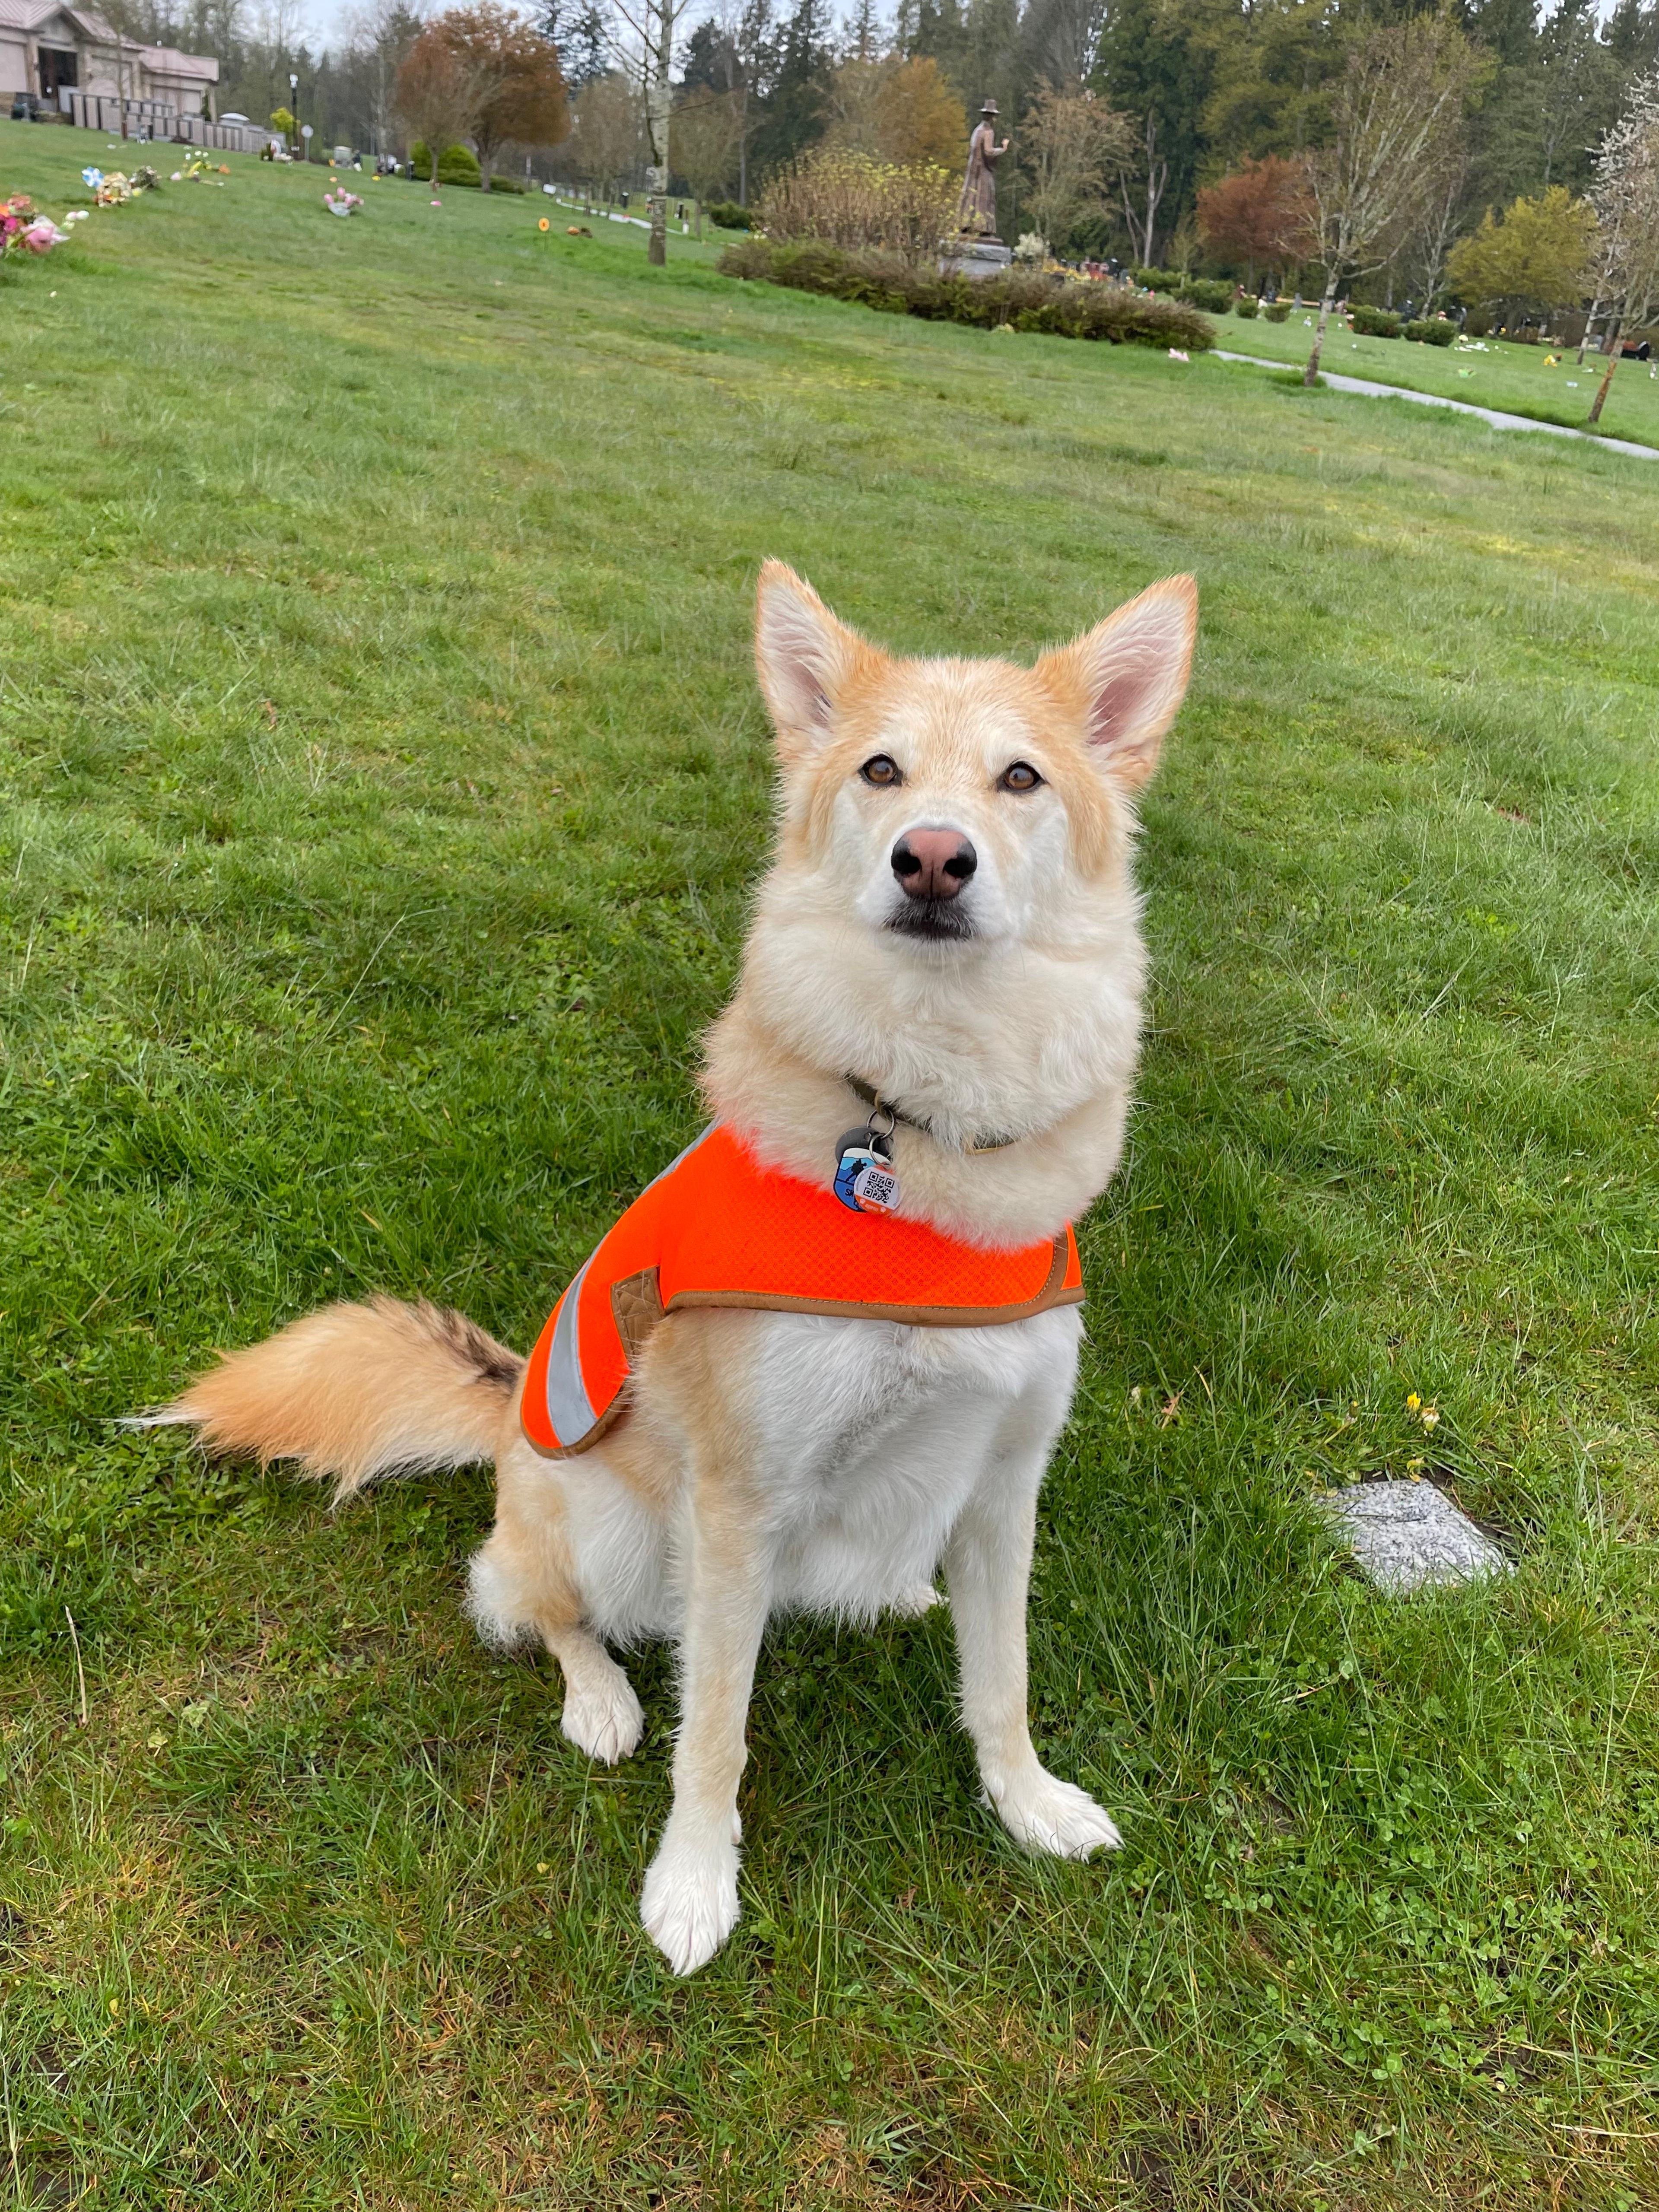 A blonde dog in a high-vis vest sits in a cemetary